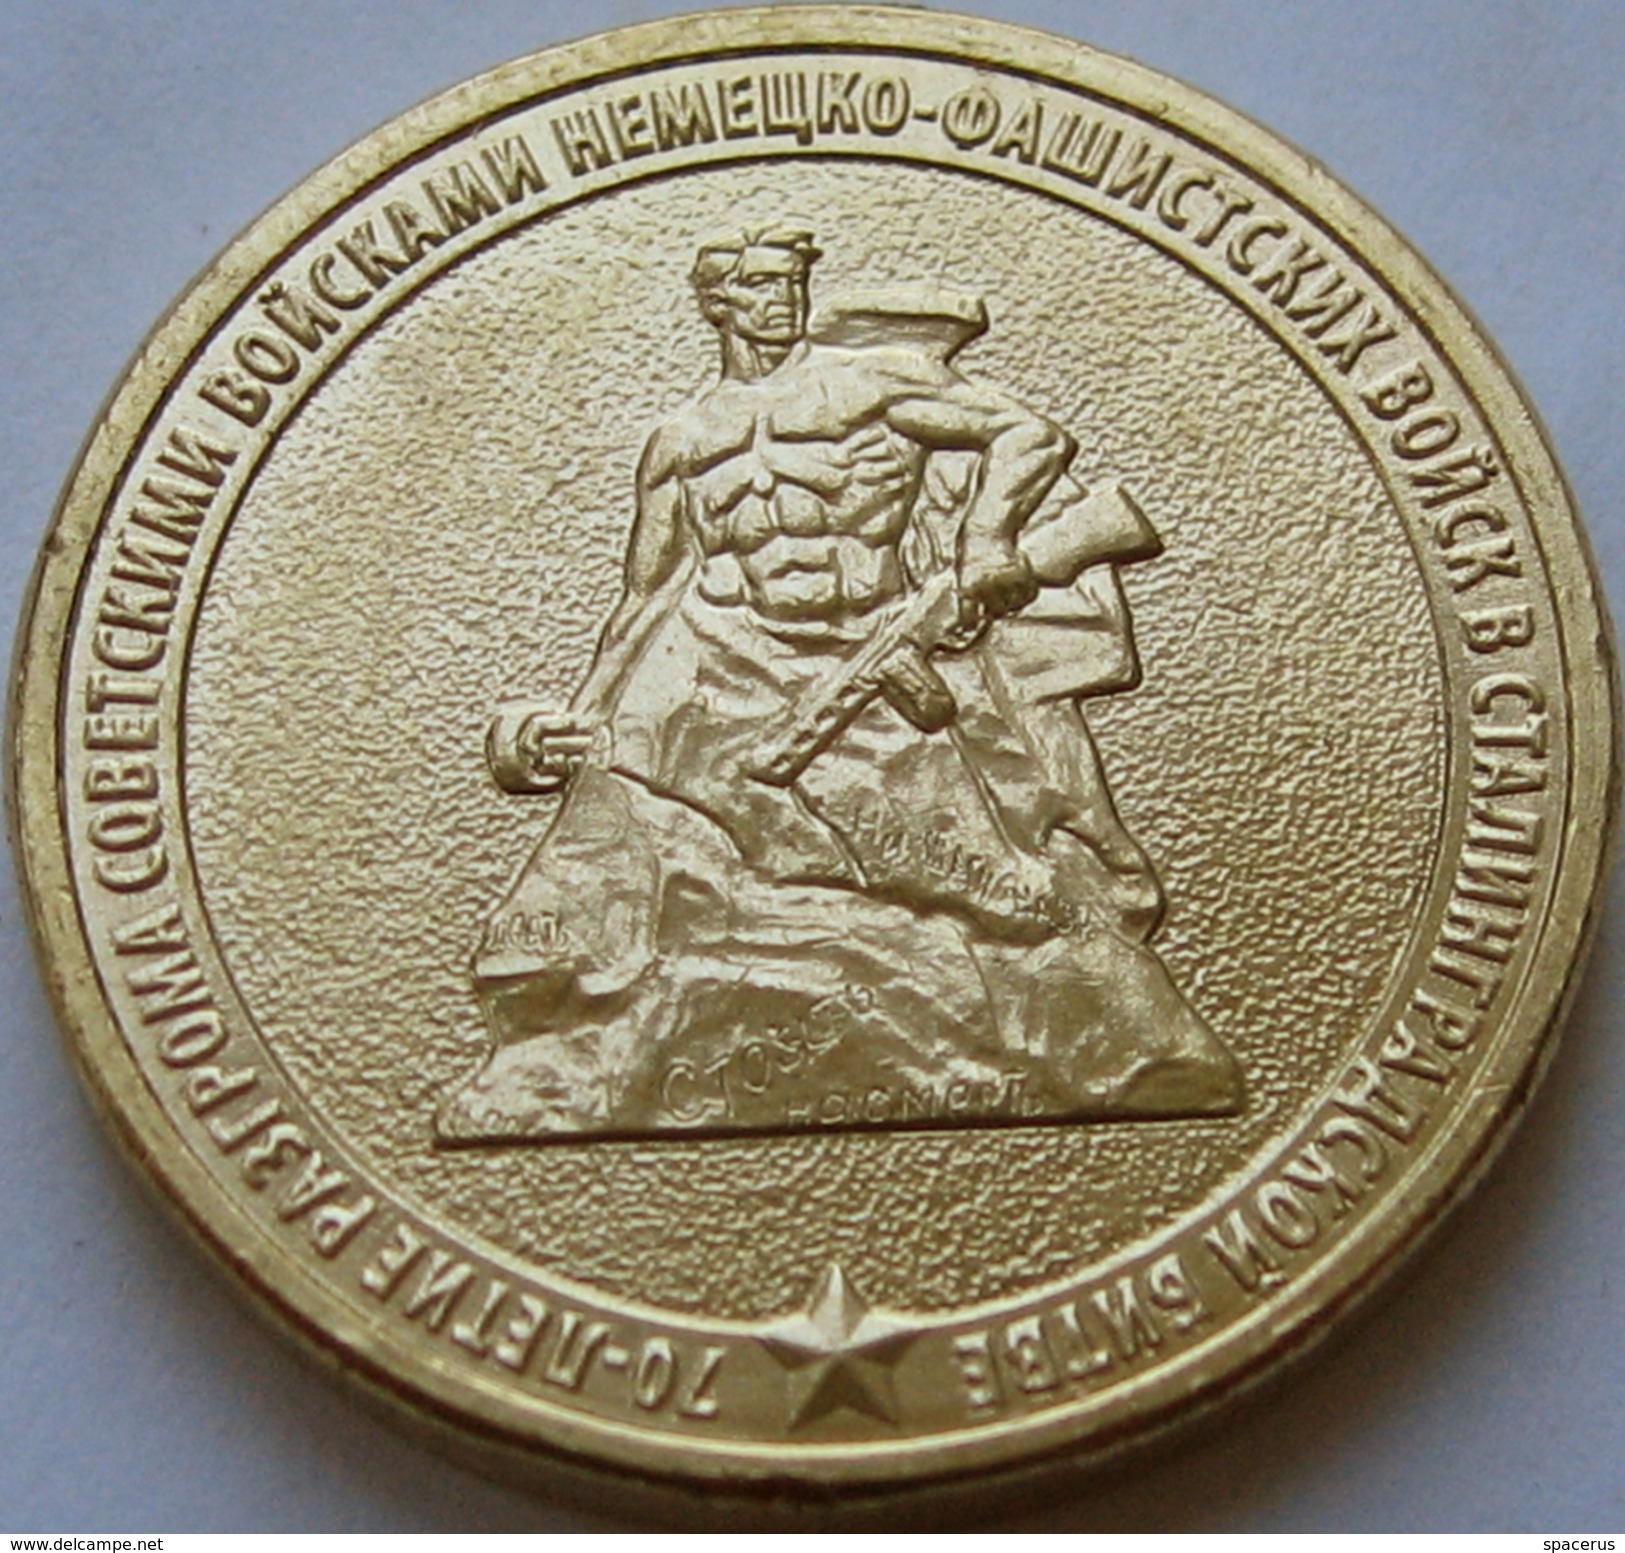 4 RUSSIA Coin 2013 10 ROUBLES Stalingrad Battle 70 Anniversary  (1 Coin) - Russland